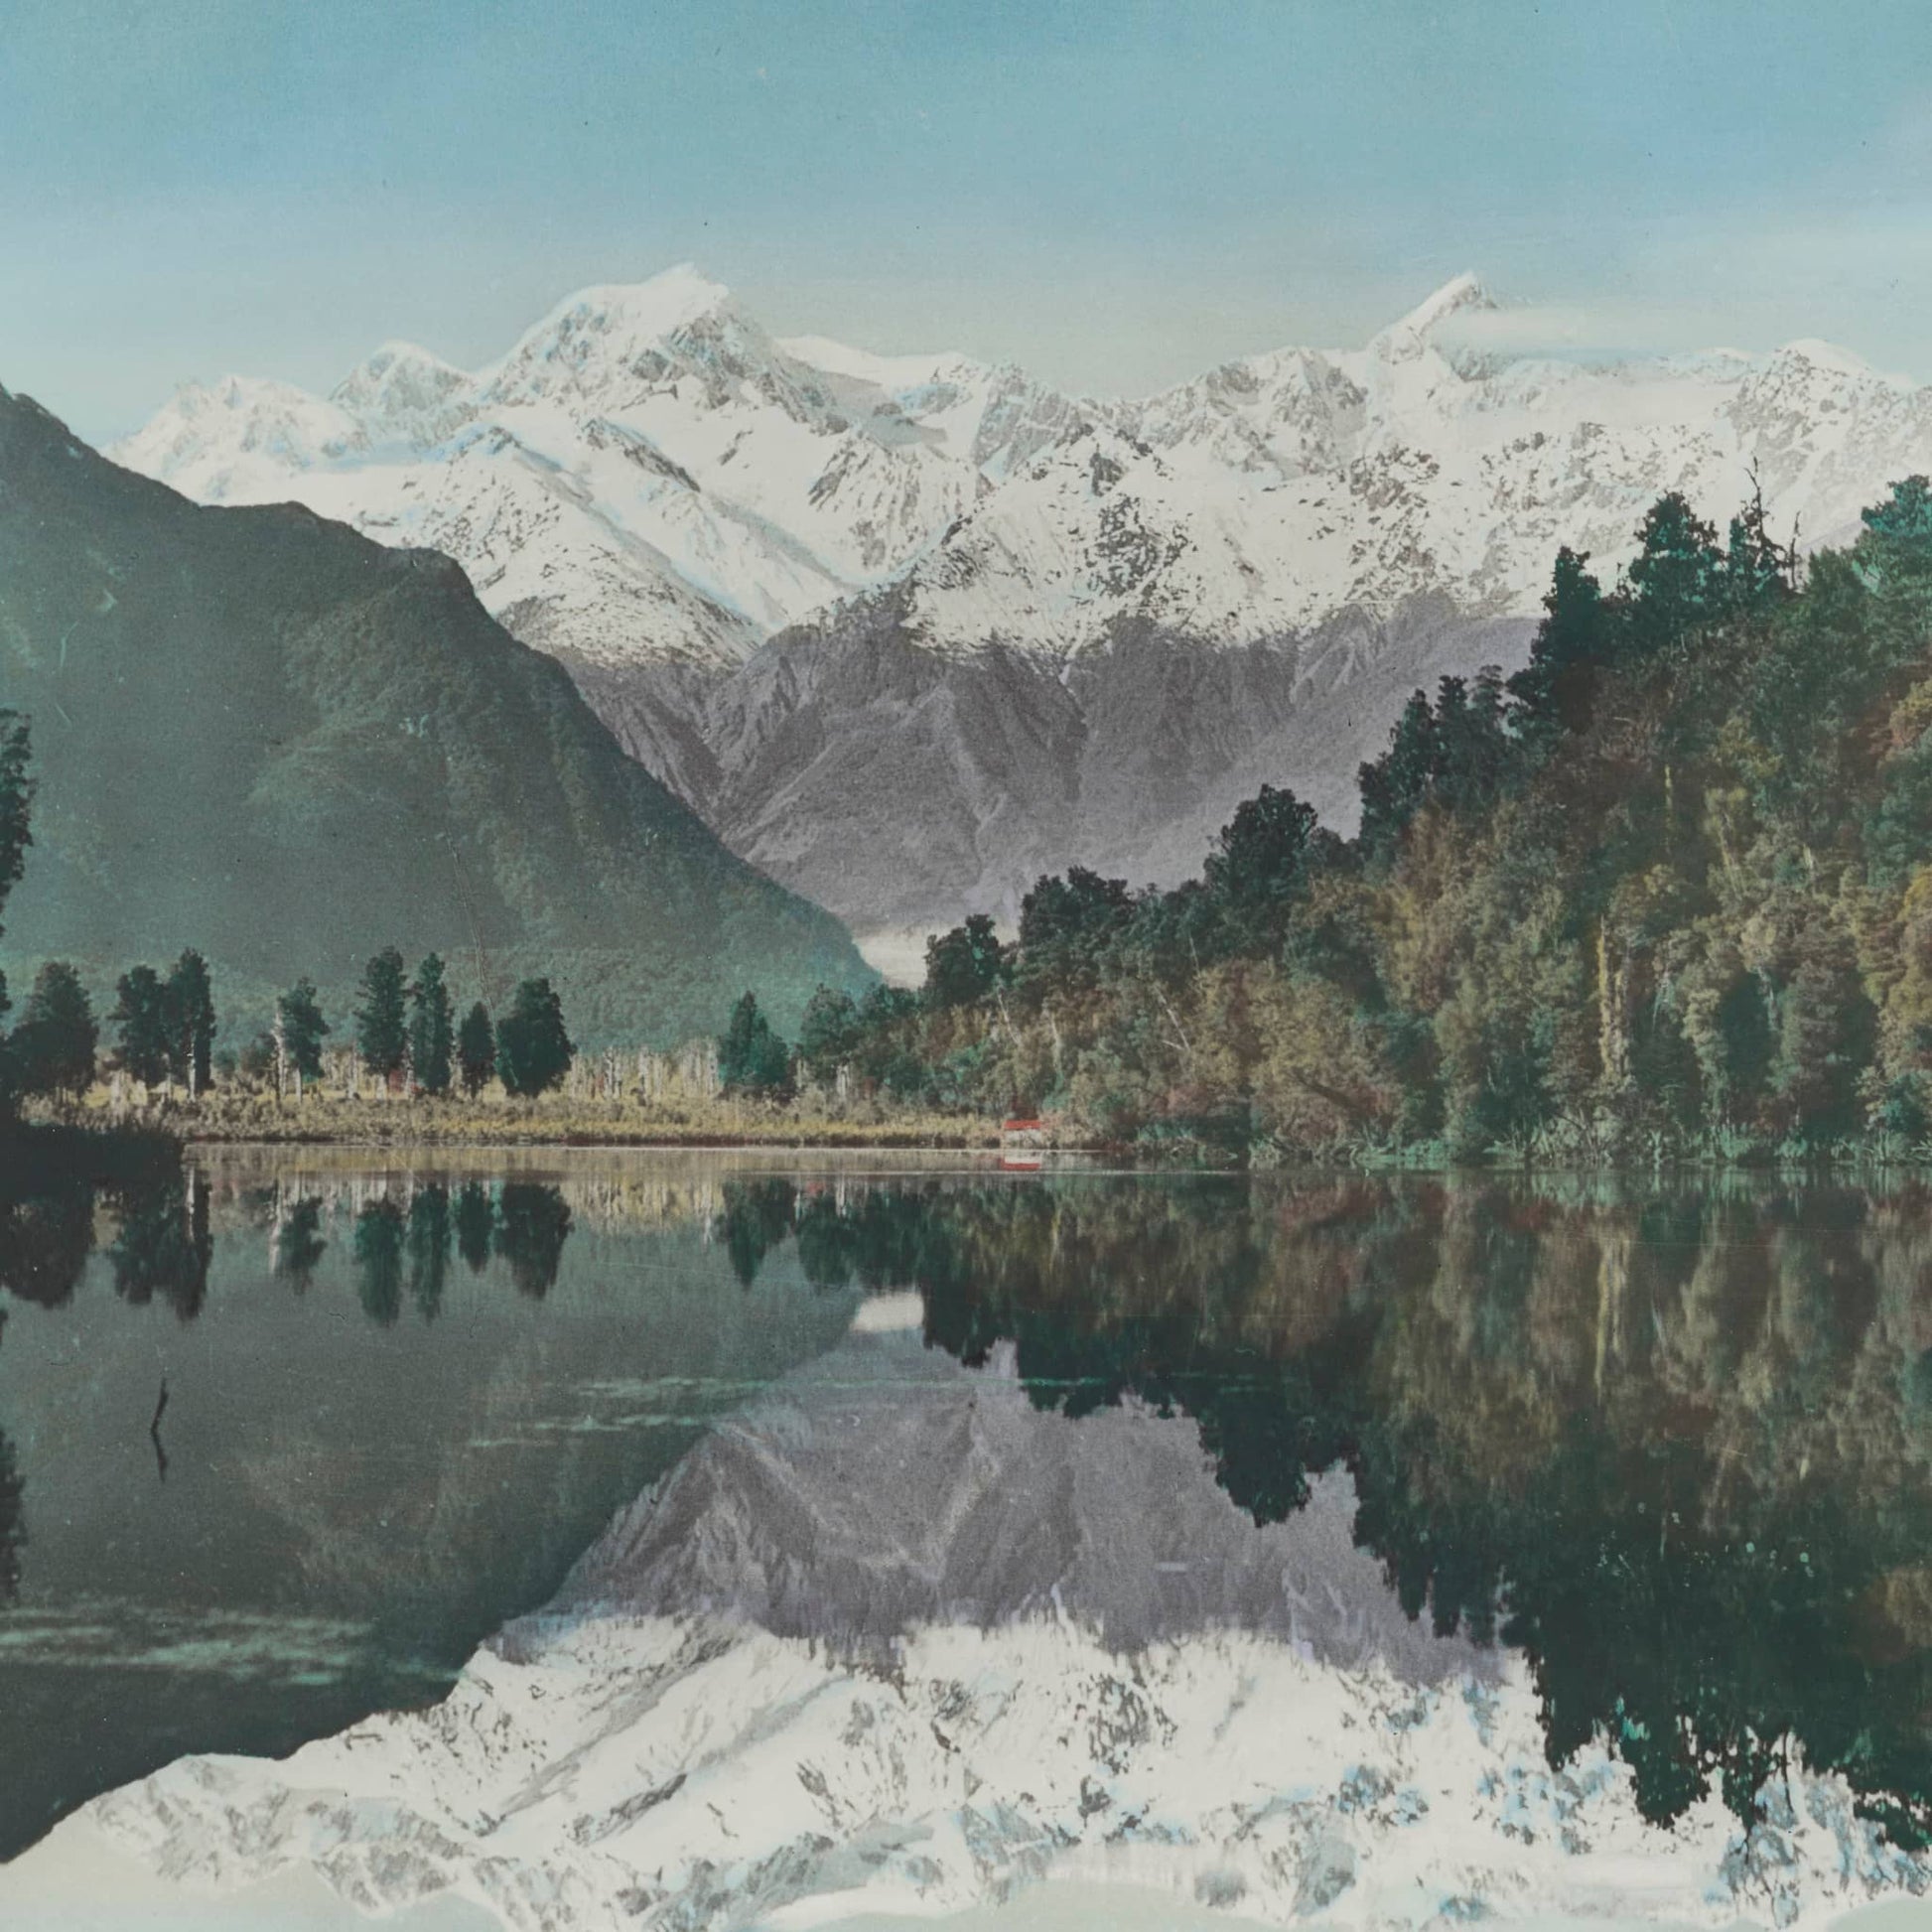 Print of lake with mountains, sky and bush mirrored in it.